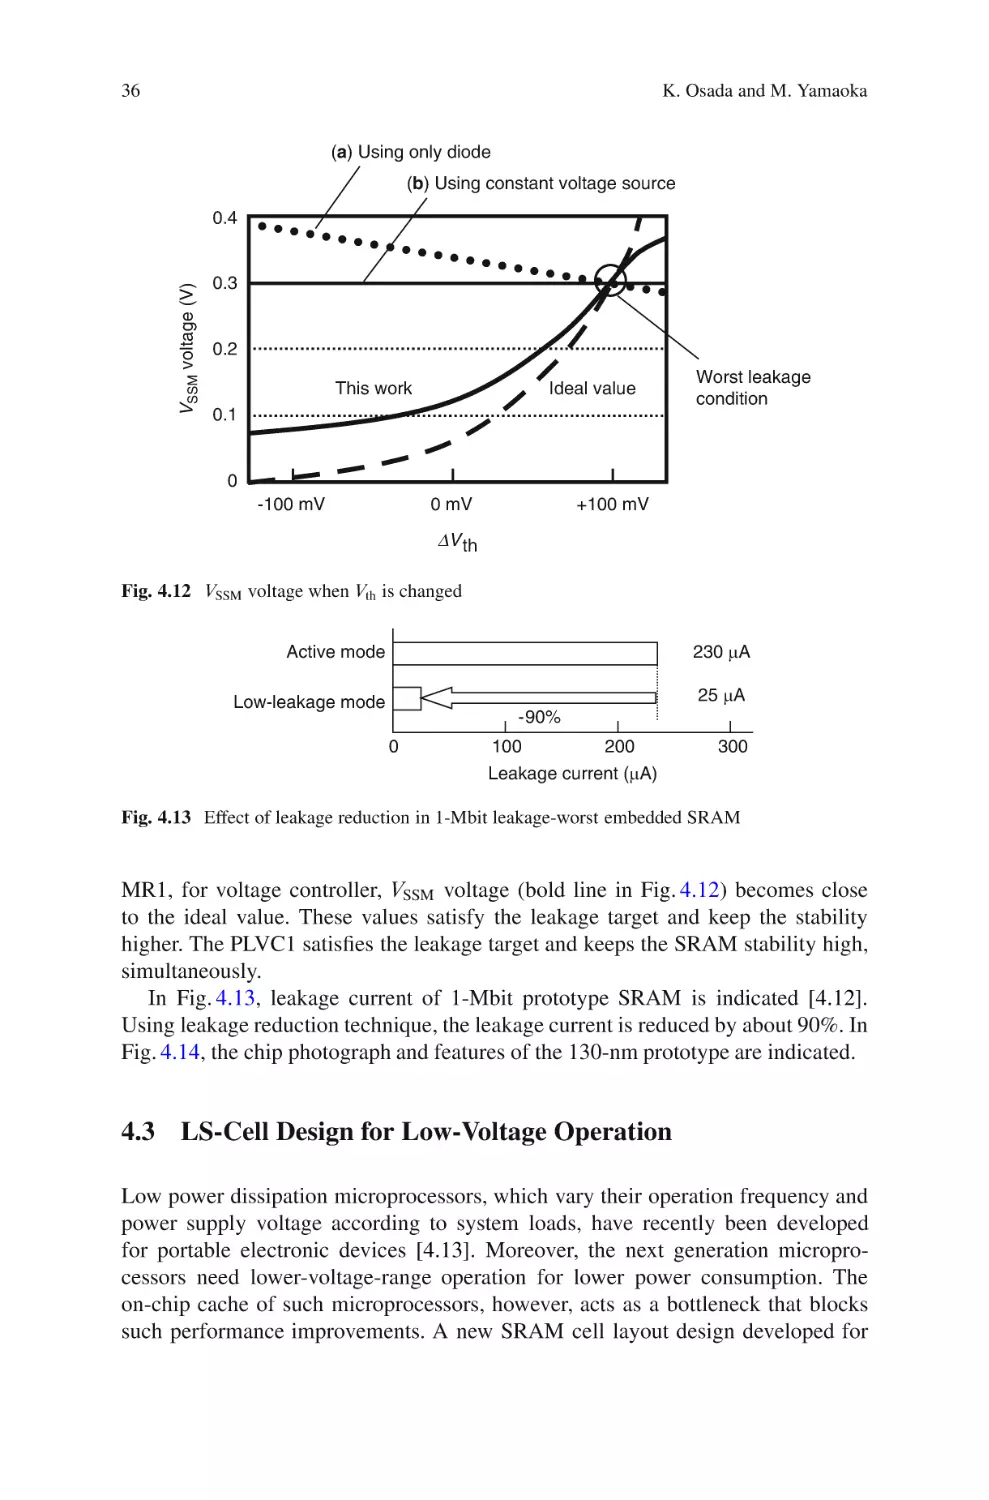 4.3 LS-Cell Design for Low-Voltage Operation